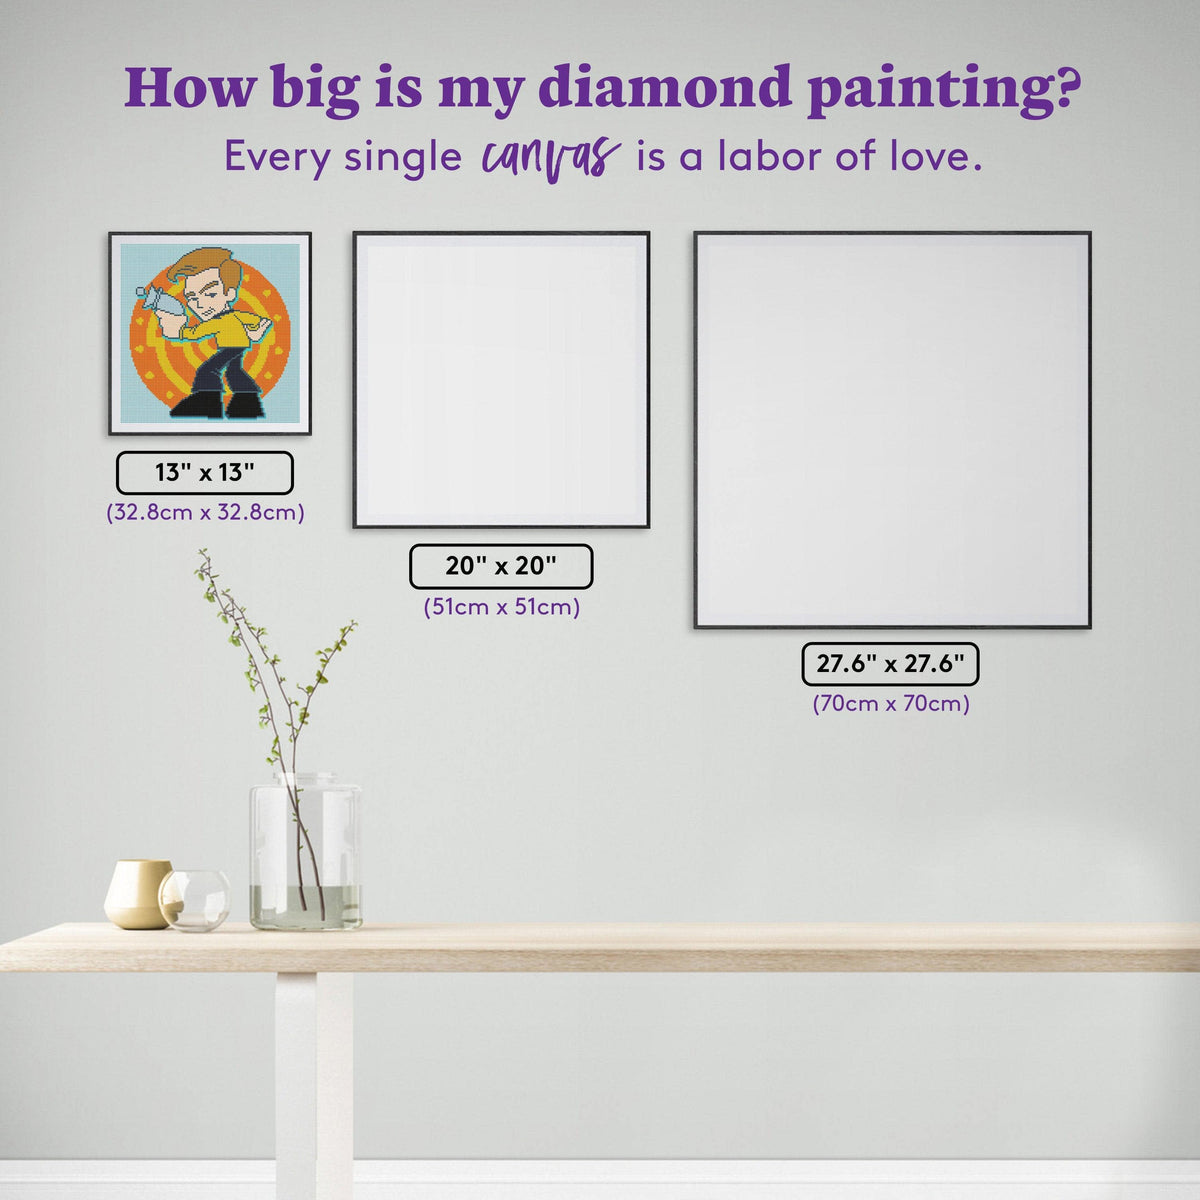 Diamond Painting Kirk 13" x 13" (32.8cm x 32.8cm) / Round with 10 Colors Including 1 ABs and 1 Fairy Dust Diamonds / 13,689